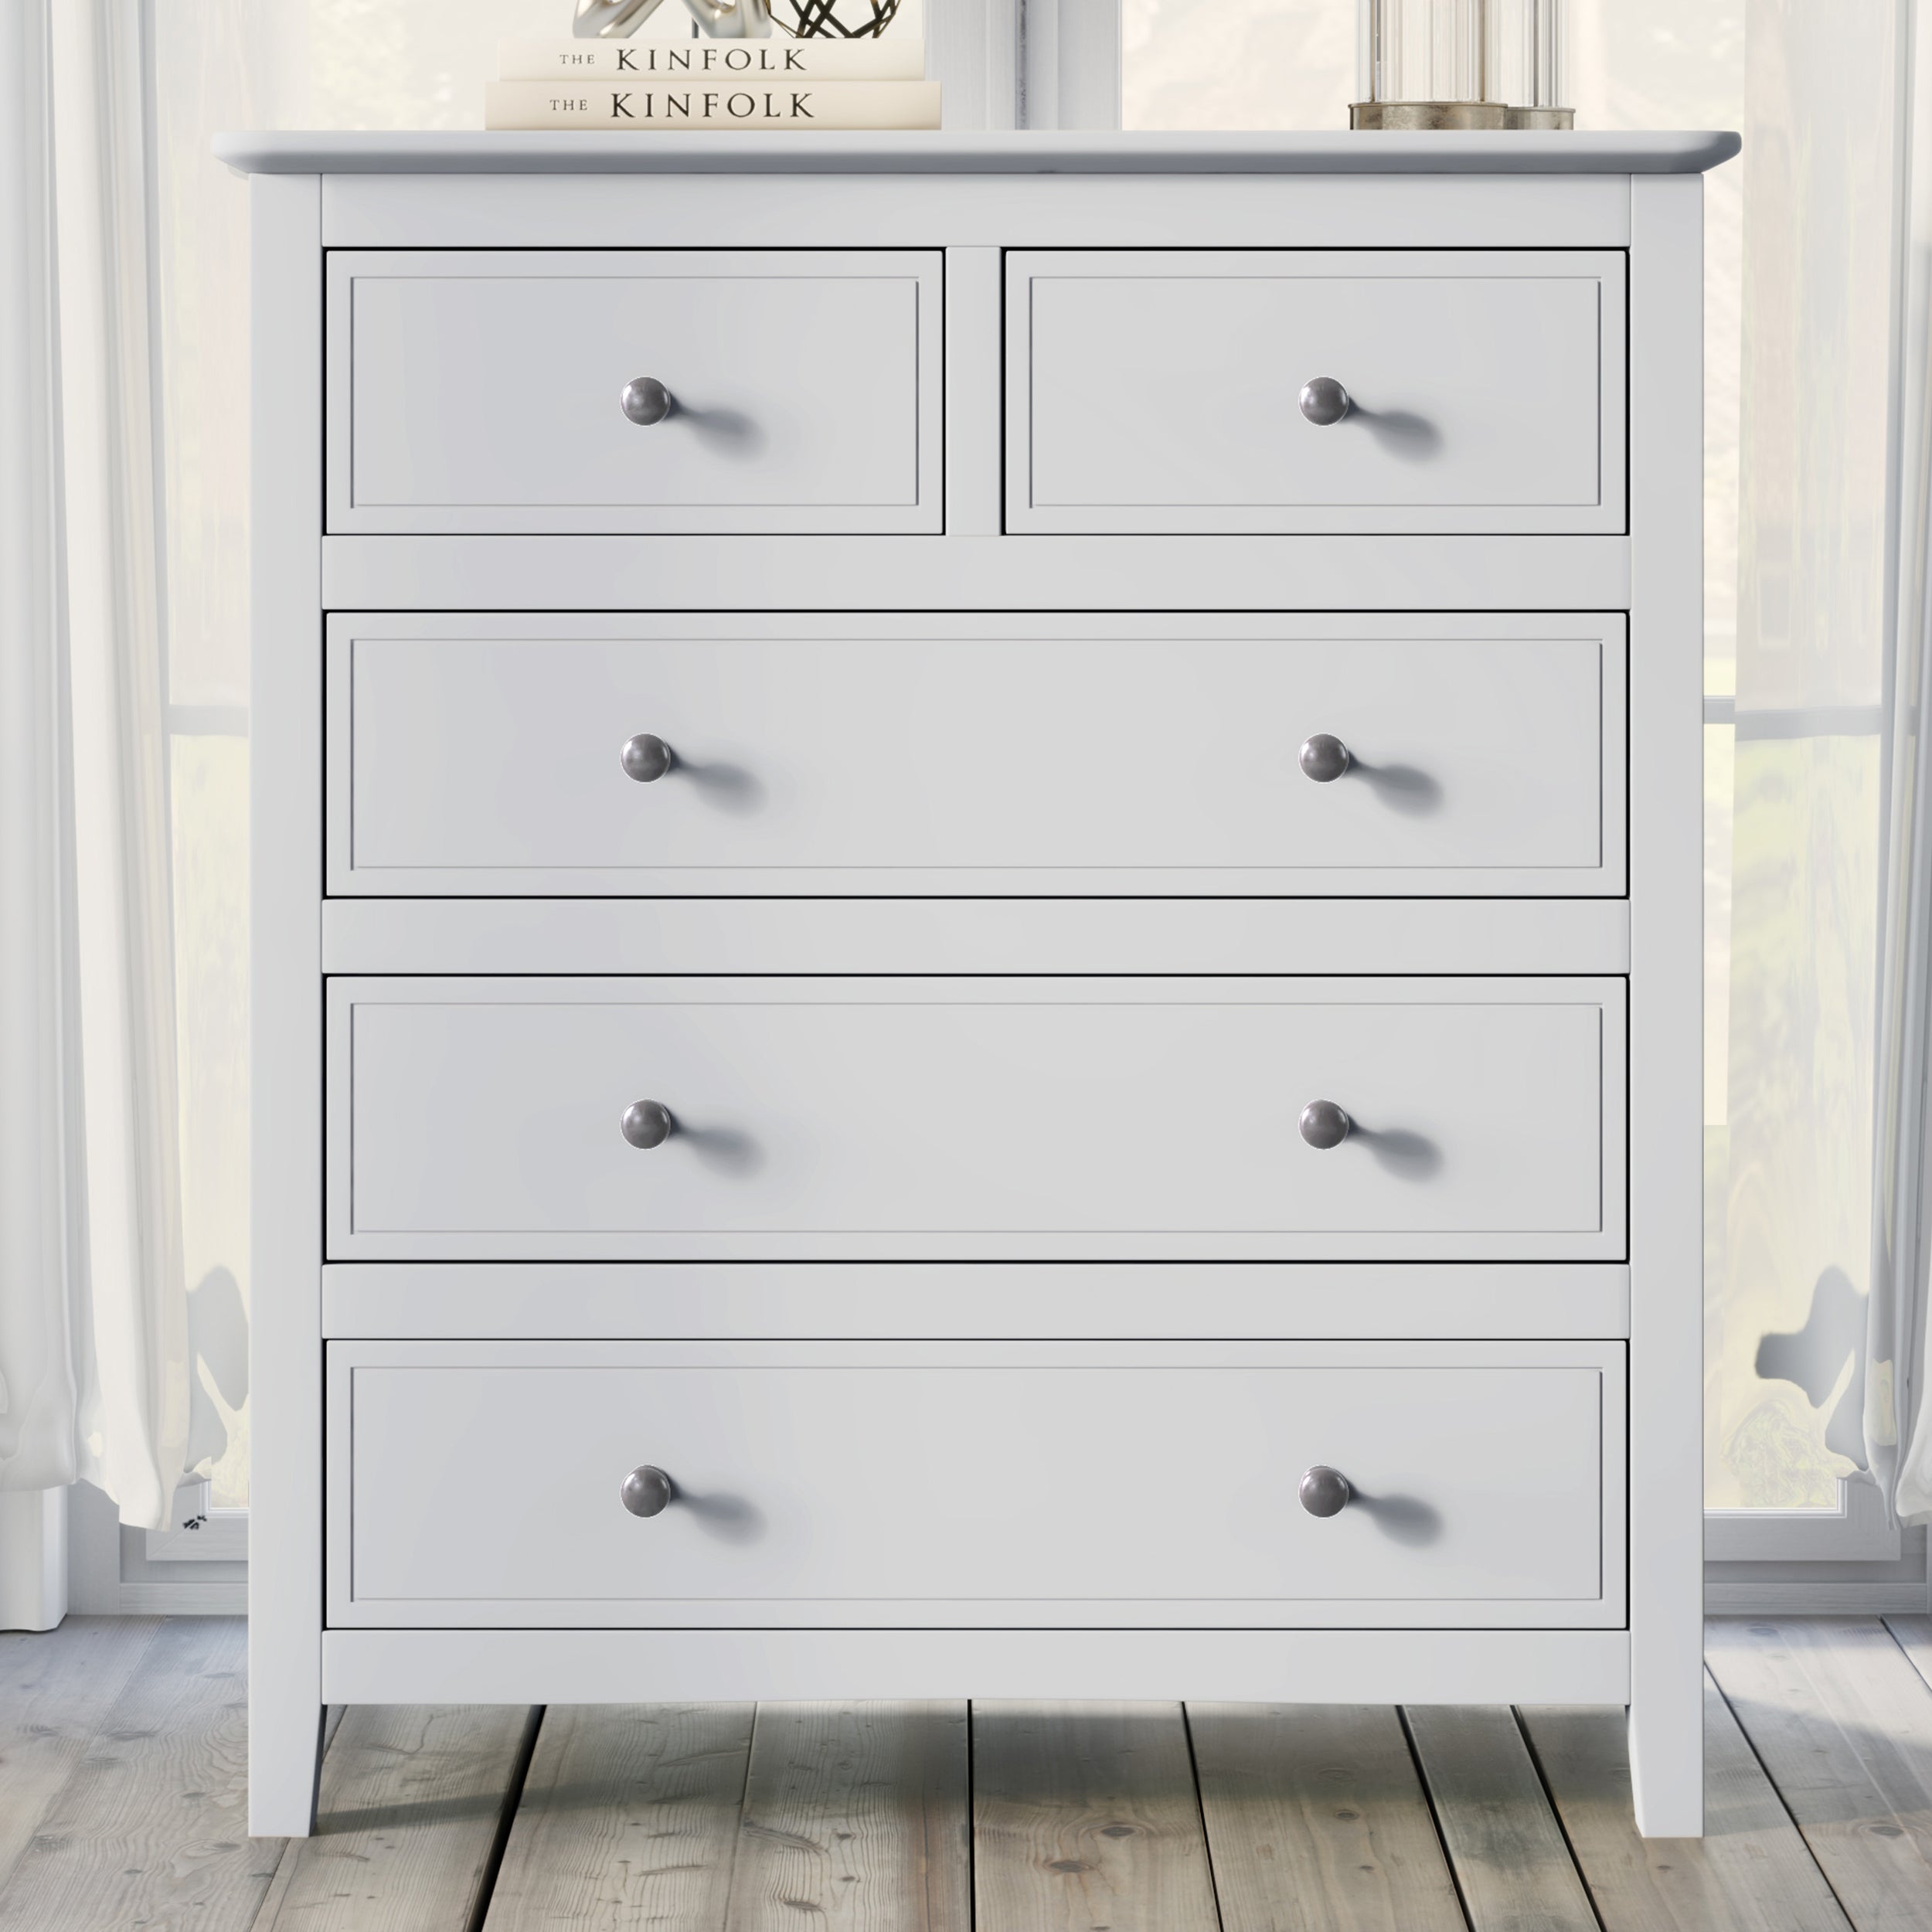 5 Drawers Solid Wood Chest in (White)